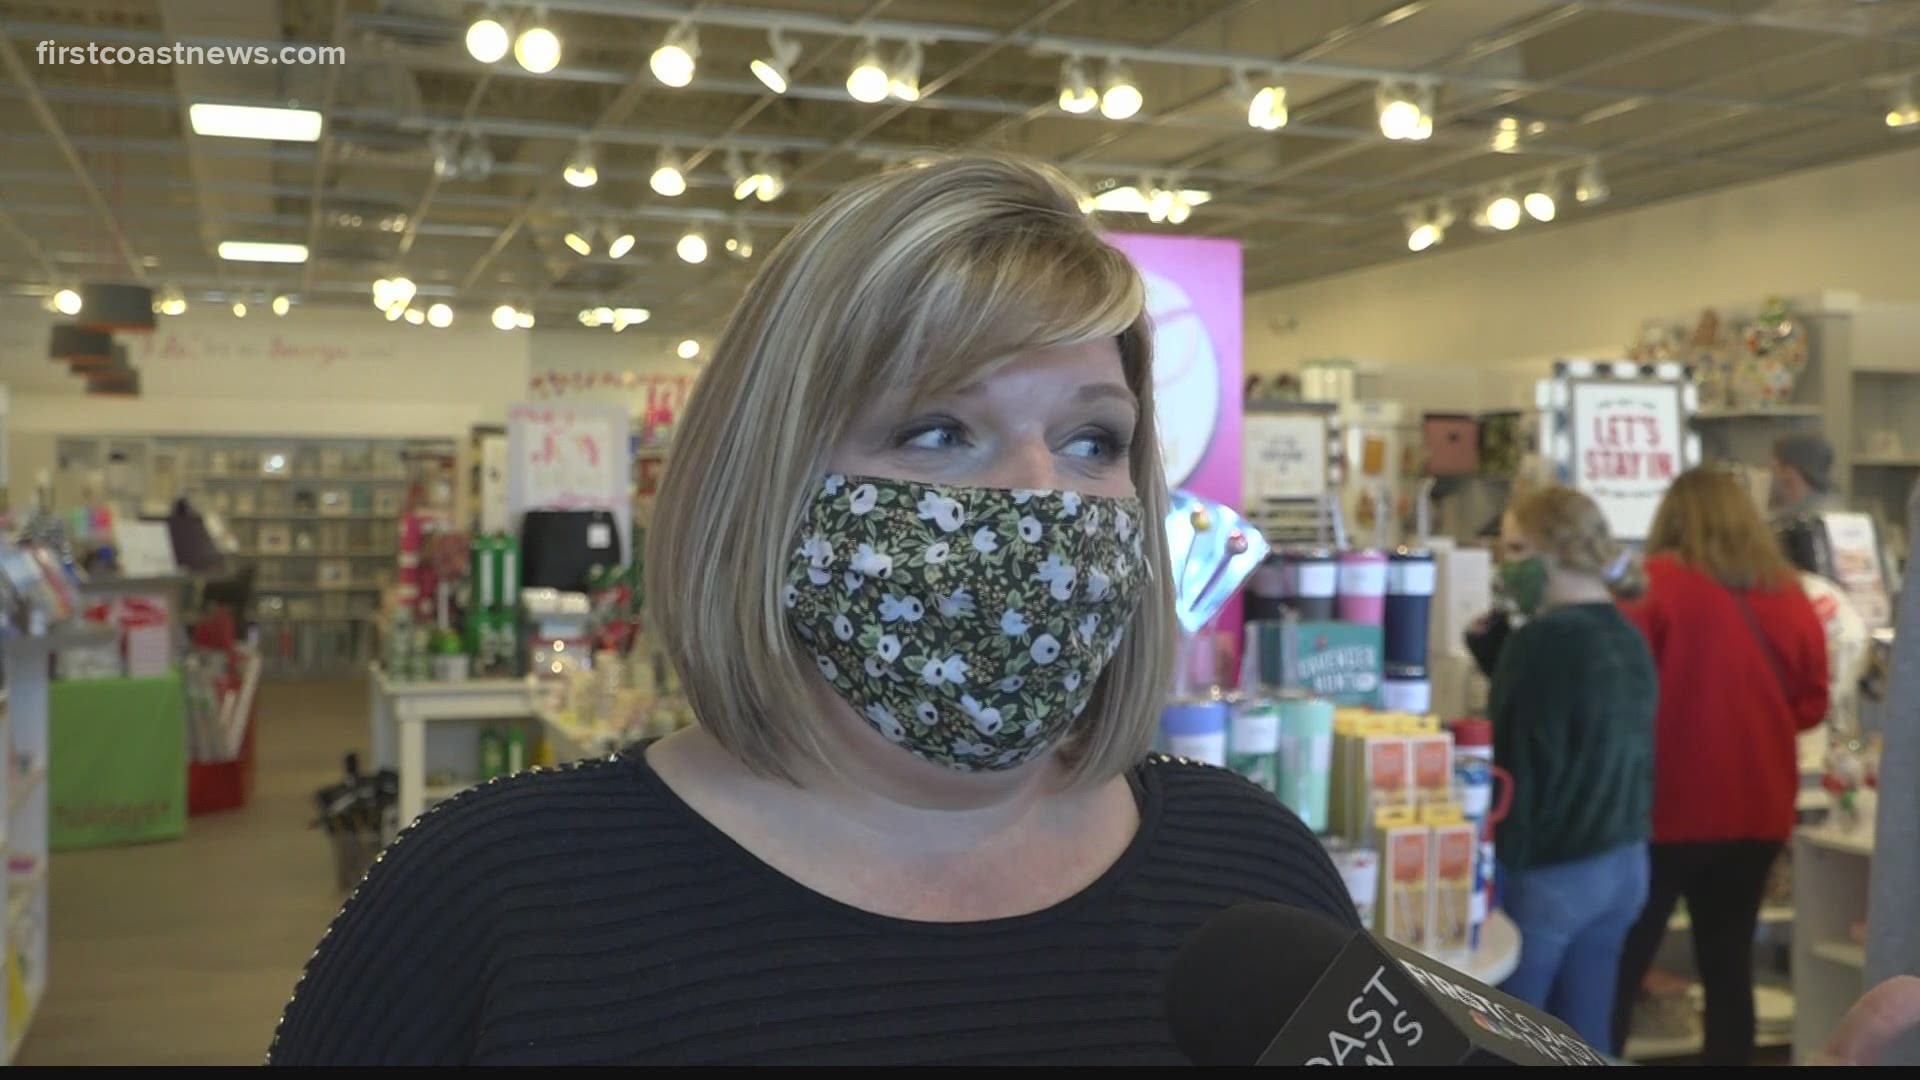 Despite the coronavirus pandemic, shoppers are flooding to the stores a week ahead of Christmas.